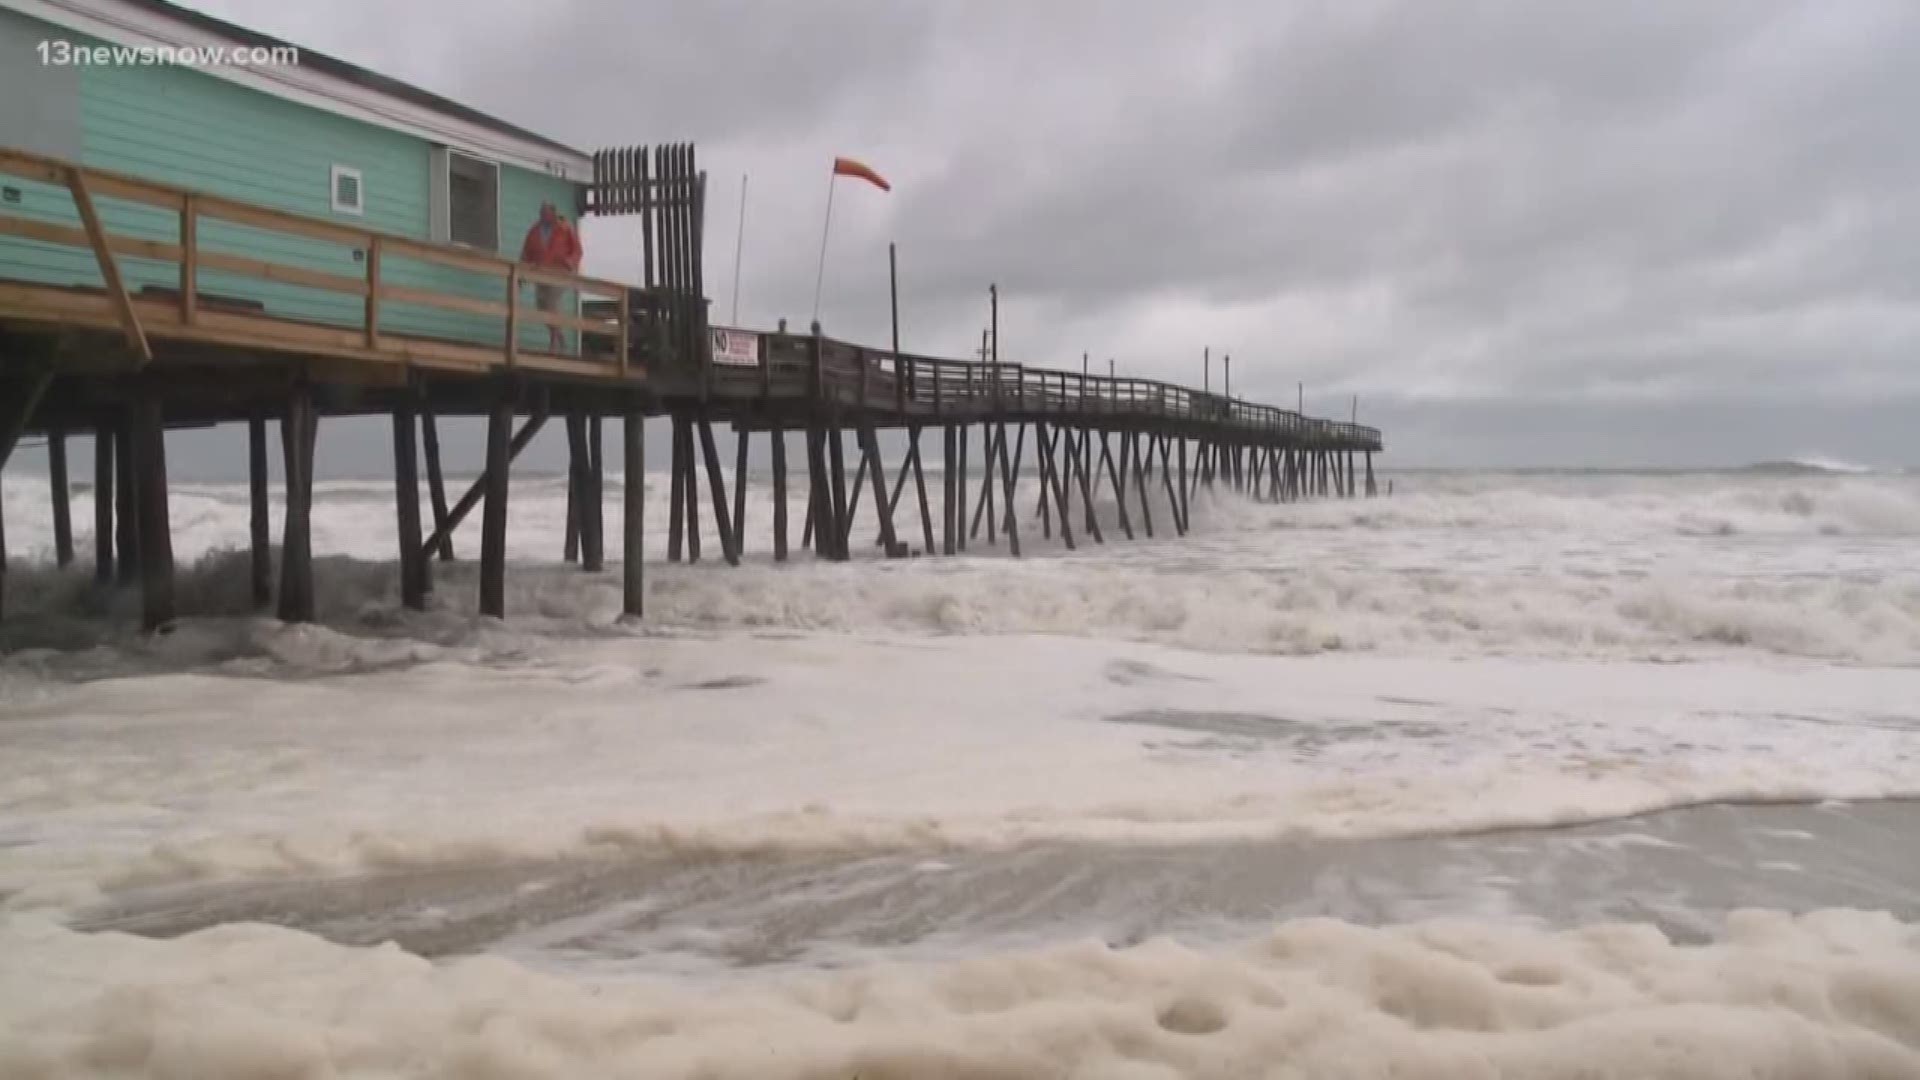 Part of the Nags Head Fishing Pier was washed away as Hurricane Dorian slammed into the Outer Banks. The Avalon Fishing Pier was also seriously damaged from the storm.